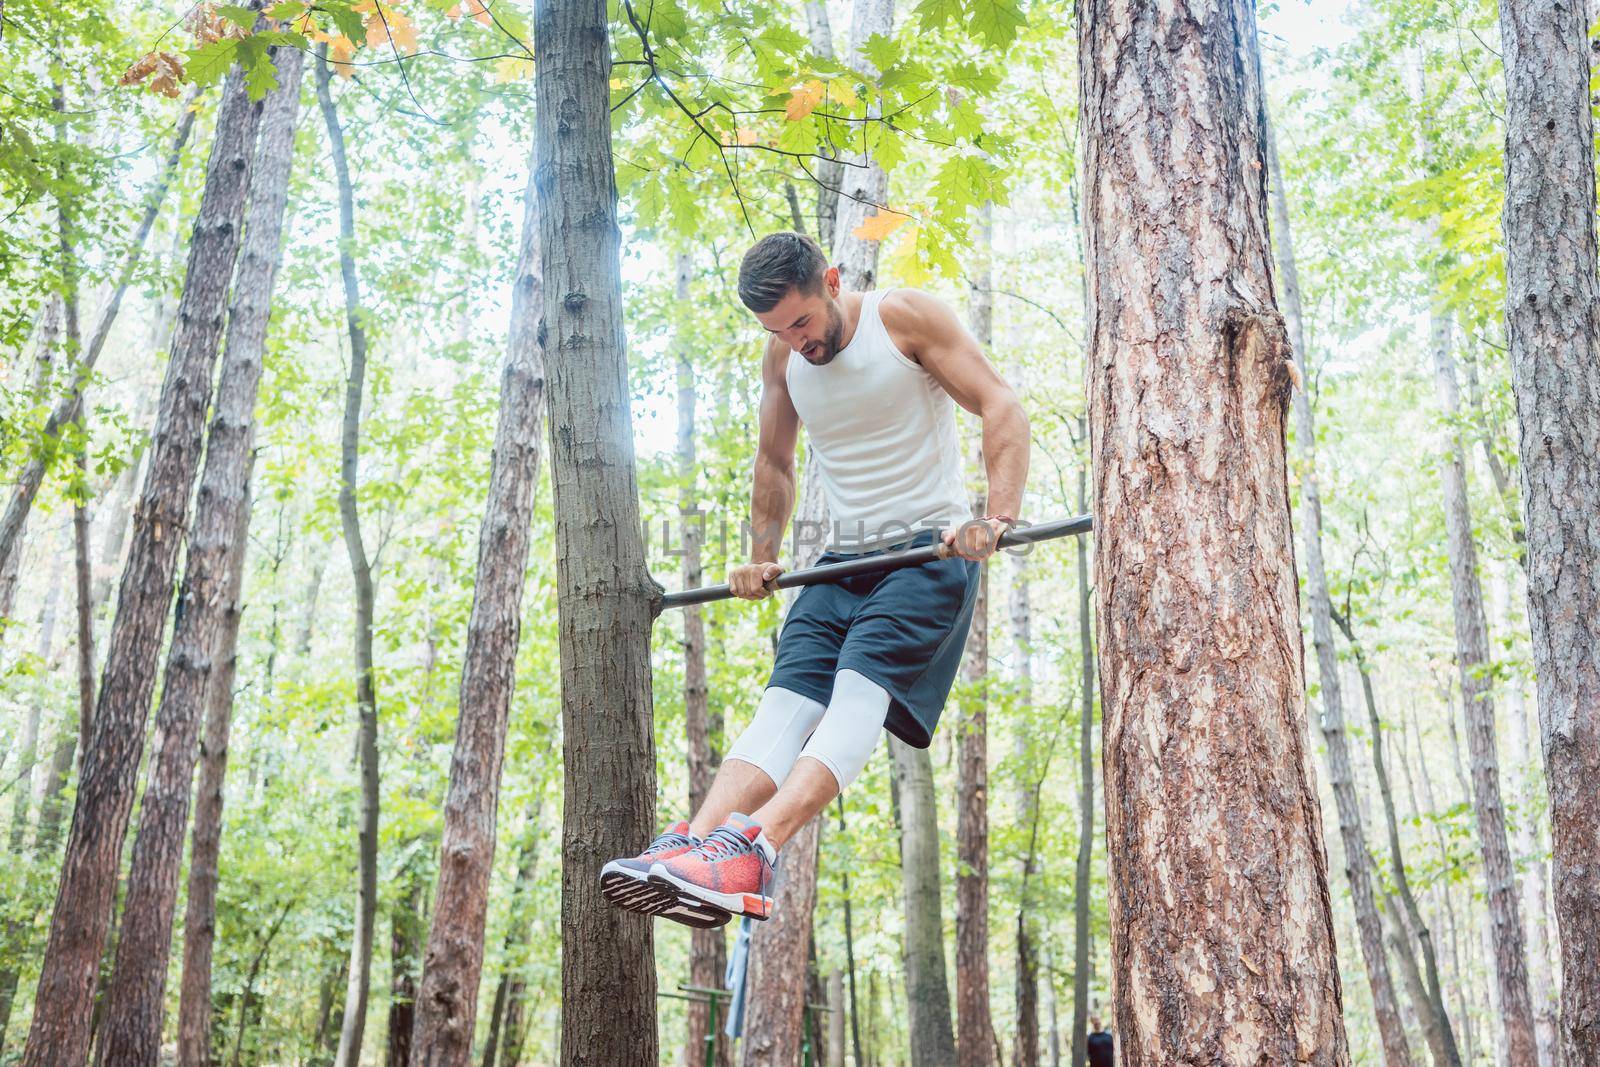 Muscular Man doing gymnastics on high bar in the woods